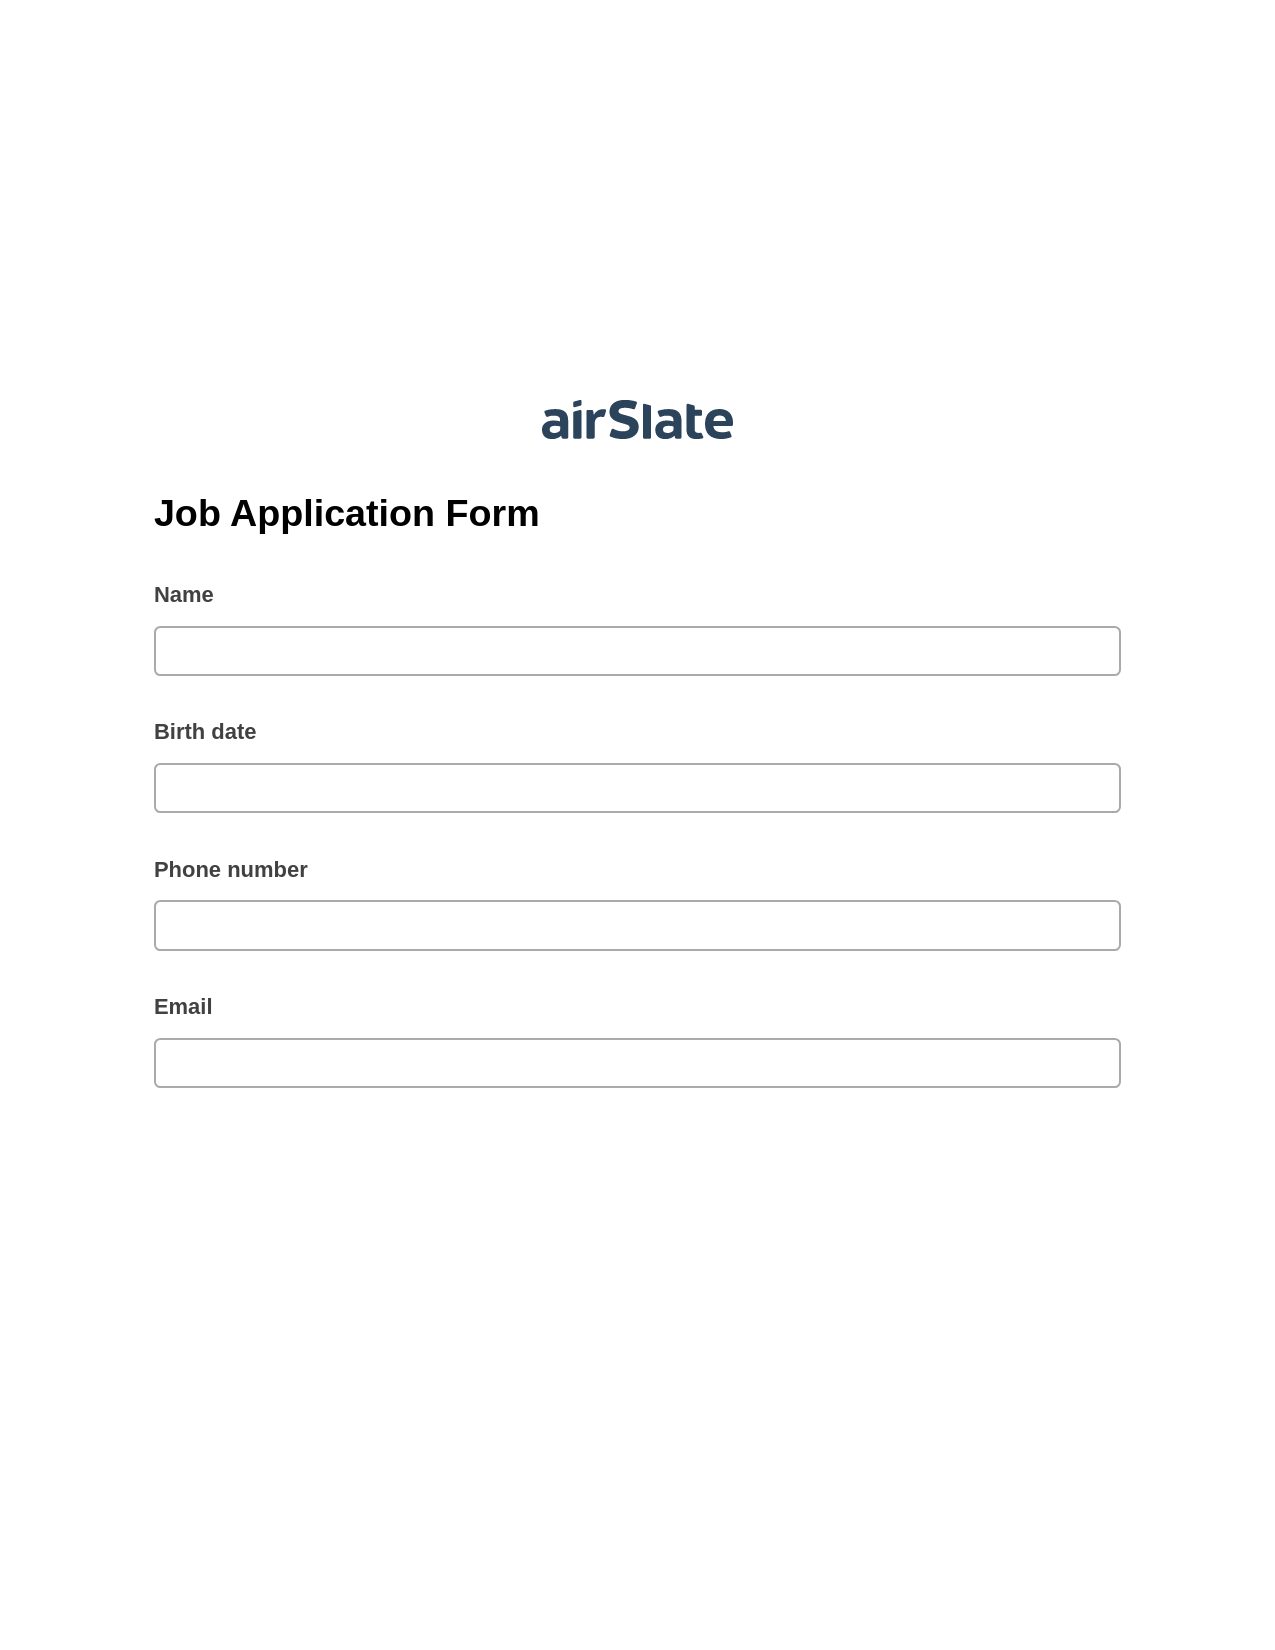 Multirole Job Application Form Pre-fill from Excel Spreadsheet Dropdown Options Bot, Create slate addon, Export to Salesforce Bot